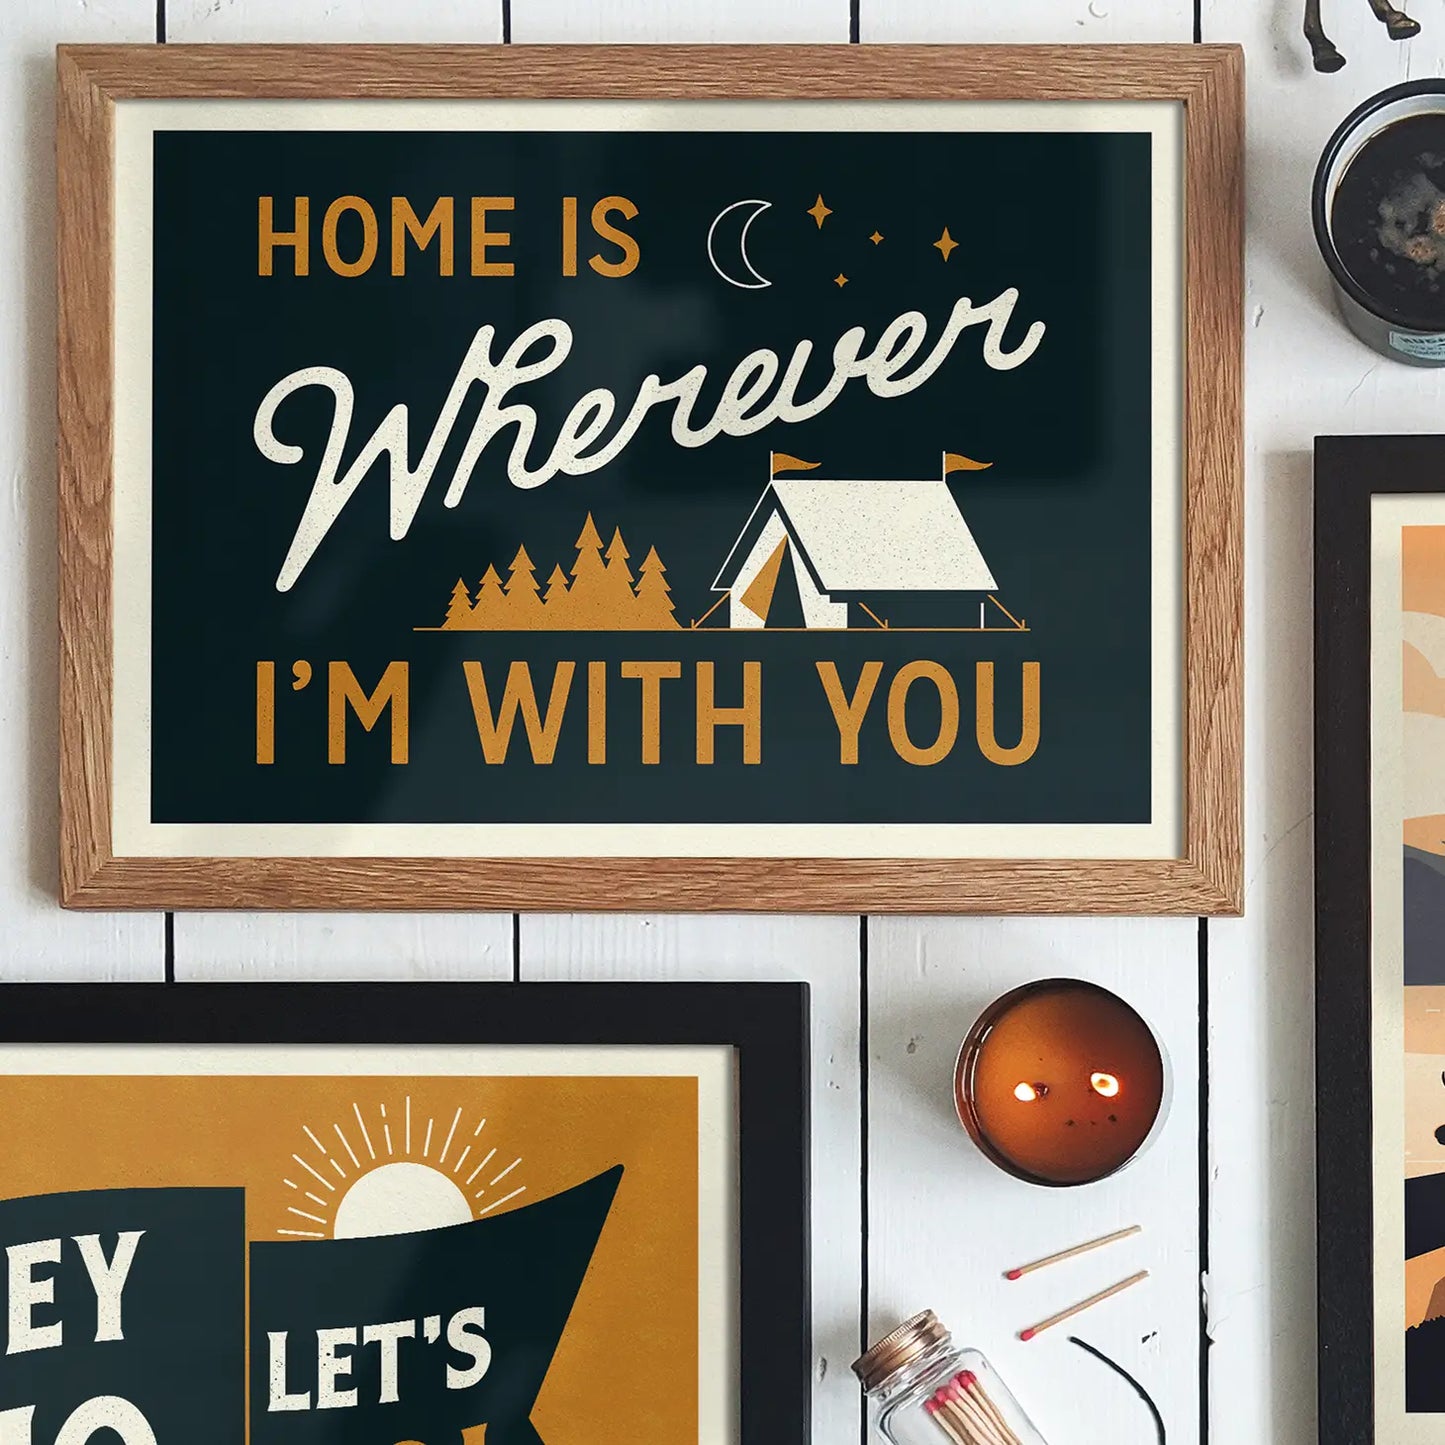 Home Is Wherever I'm With You 11.7" x 16.5" Camping Print